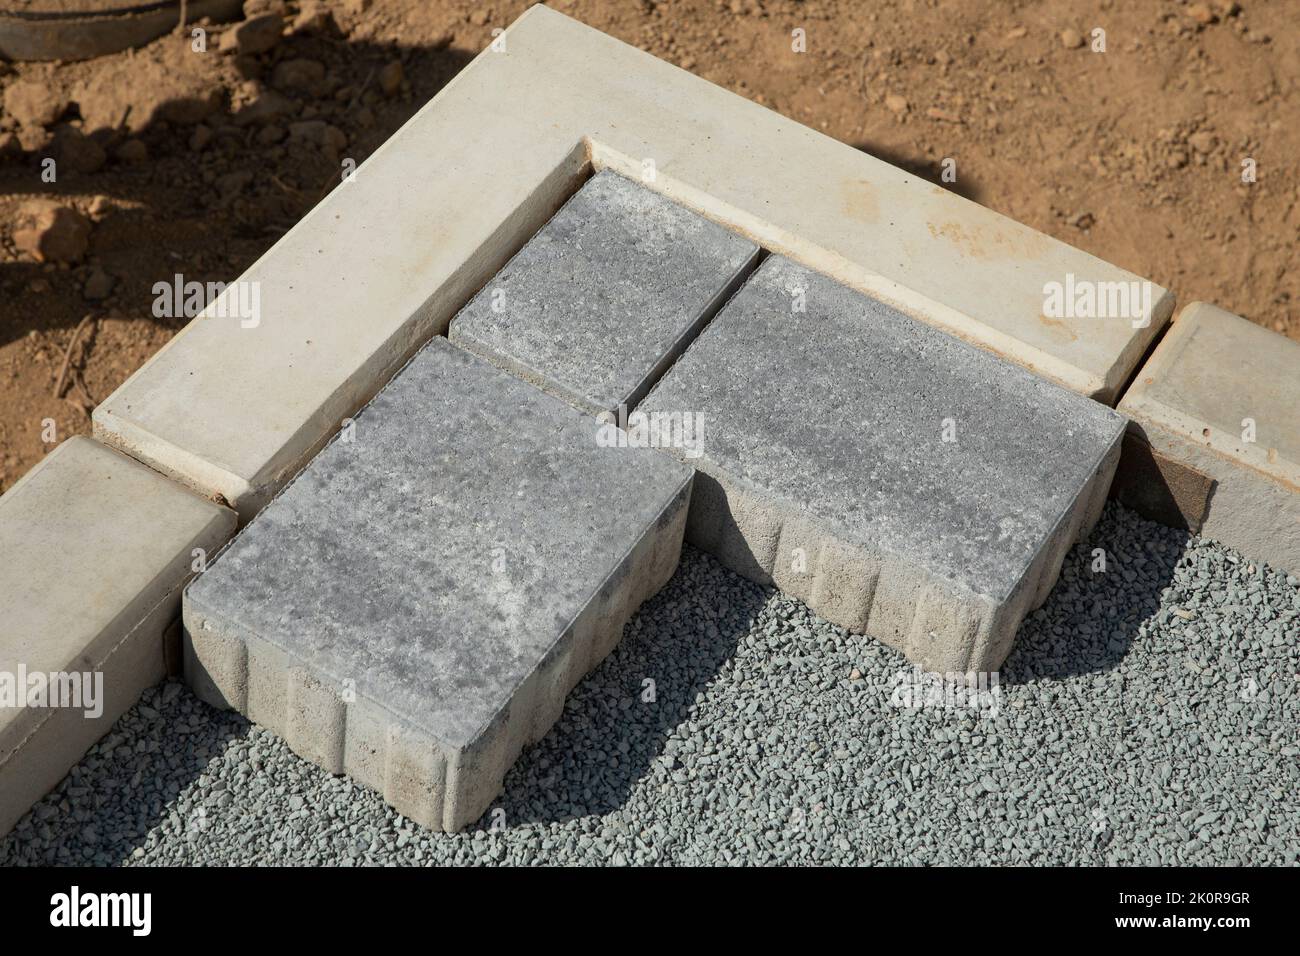 Laying gray concrete paving slabs in the courtyard of the house on a sandy foundation. Stock Photo